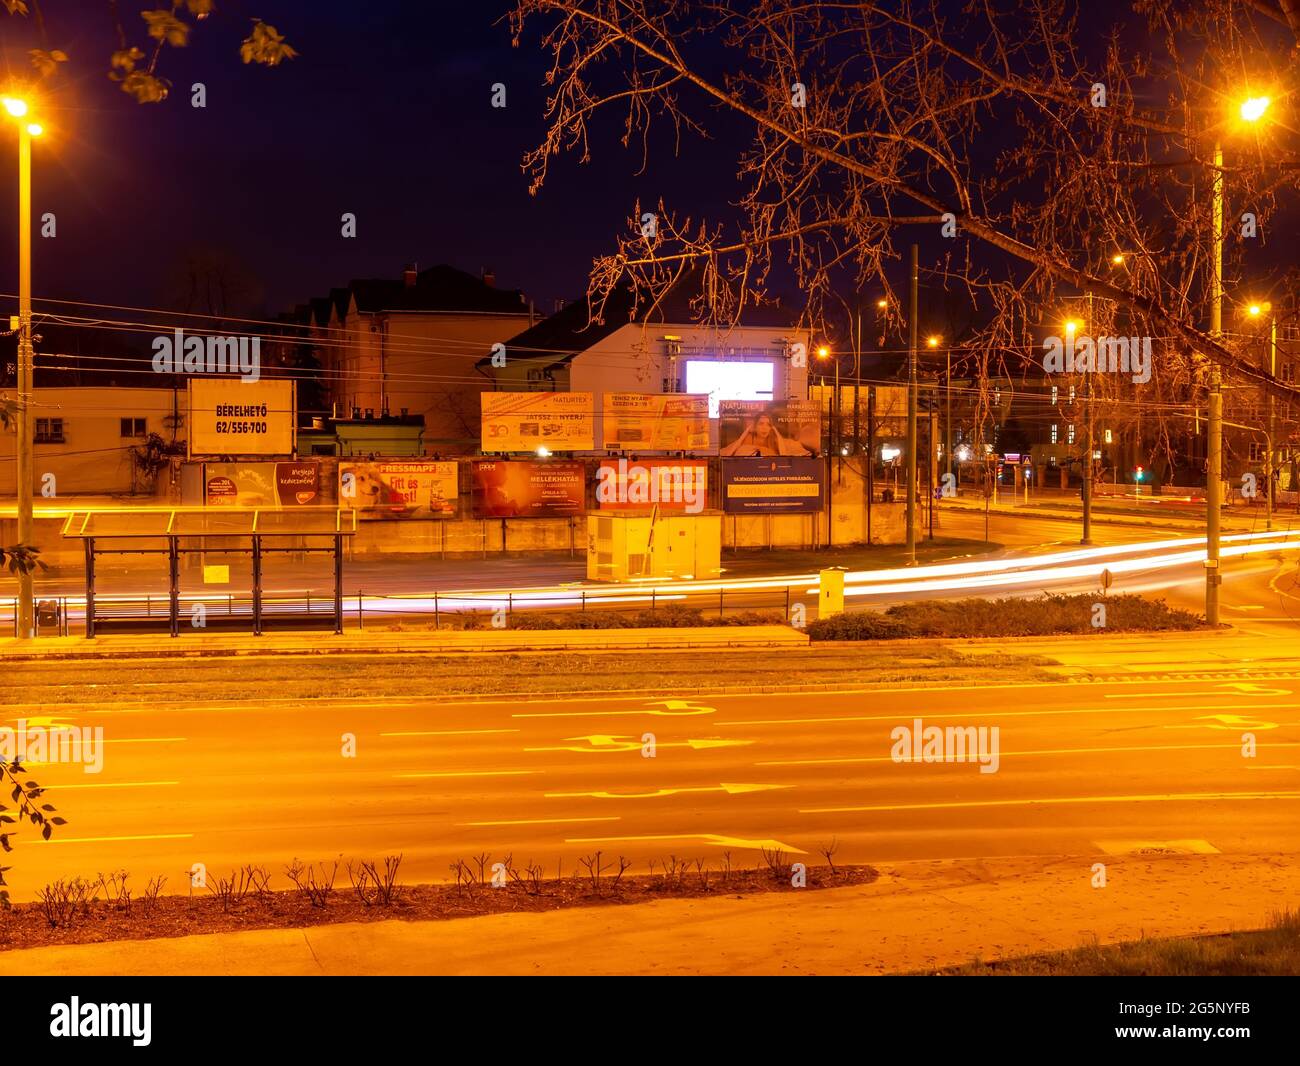 SZEGED, HUNGARY - MARCH 28, 2020: View on the traffic and the tram in Szeged, Hungary. Stock Photo